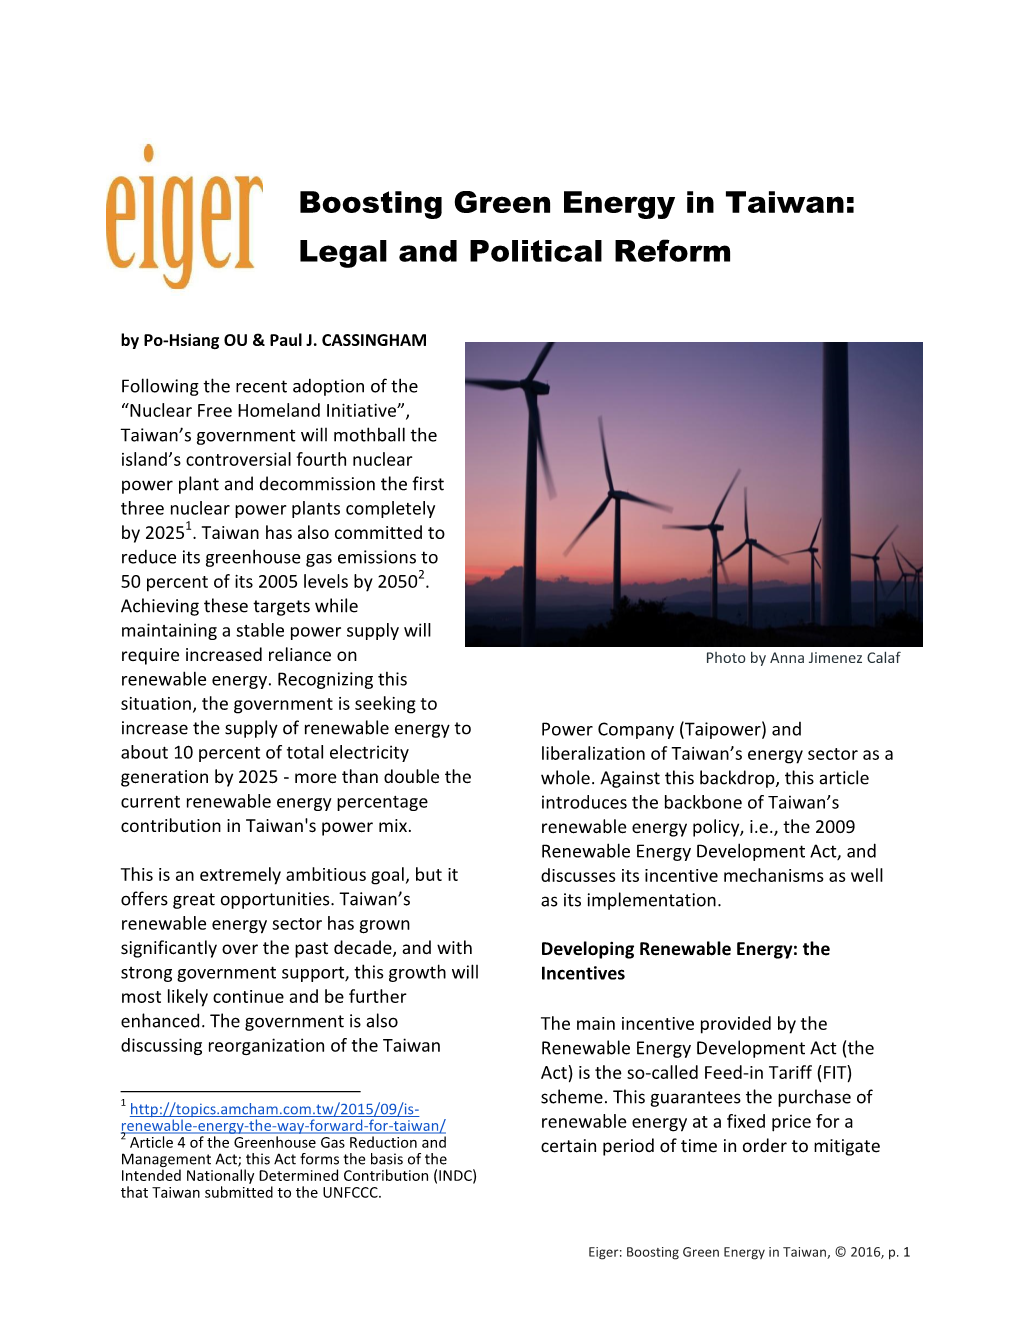 Boosting Green Energy in Taiwan: Legal and Political Reform